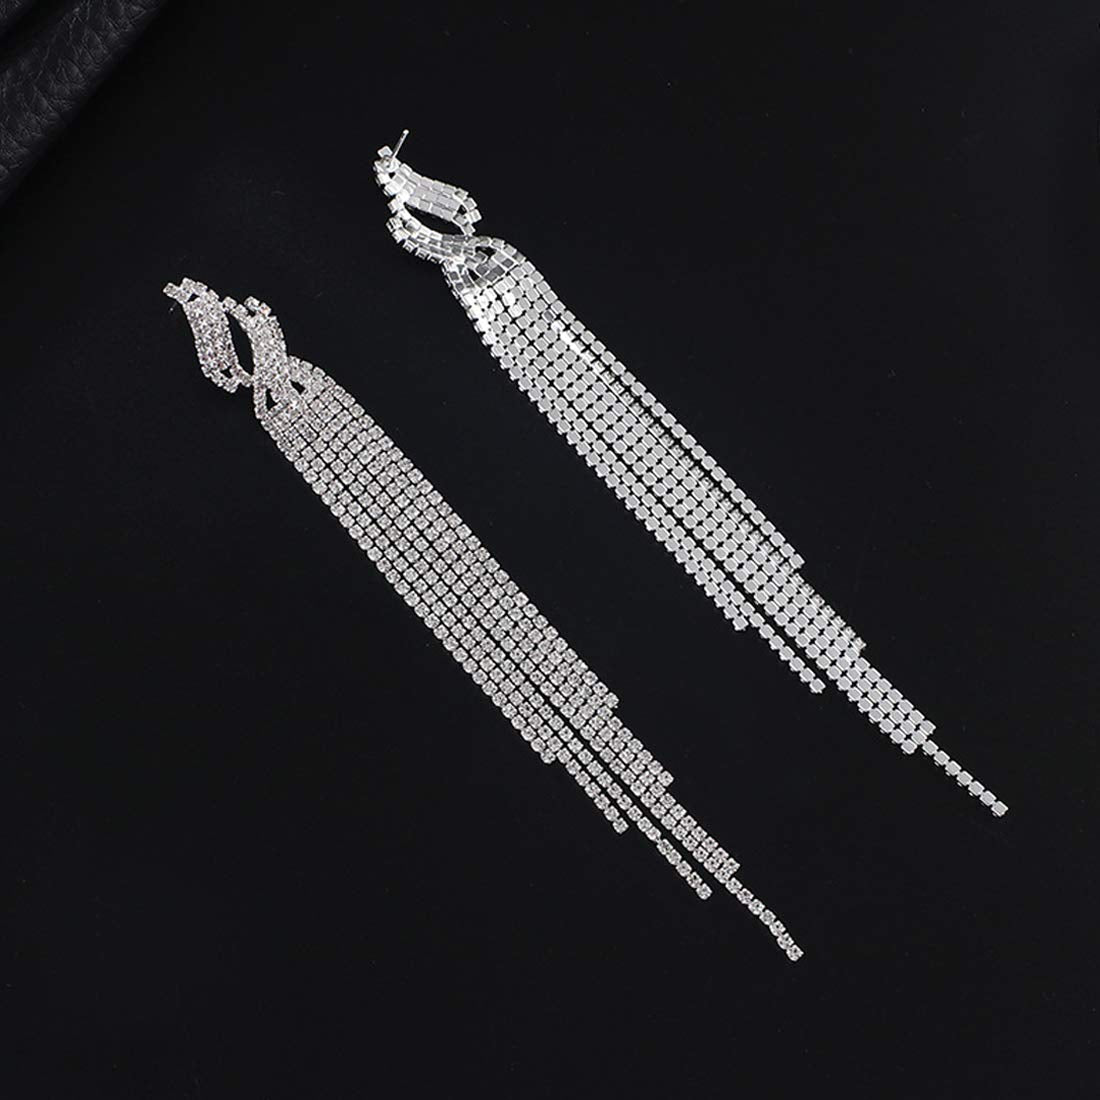 Yellow Chimes Elegant Latest Fashion Silver Plated Crystal Dangler Earrings for Women and Girls, Medium (YCFJER-605CRLDNG-SL)